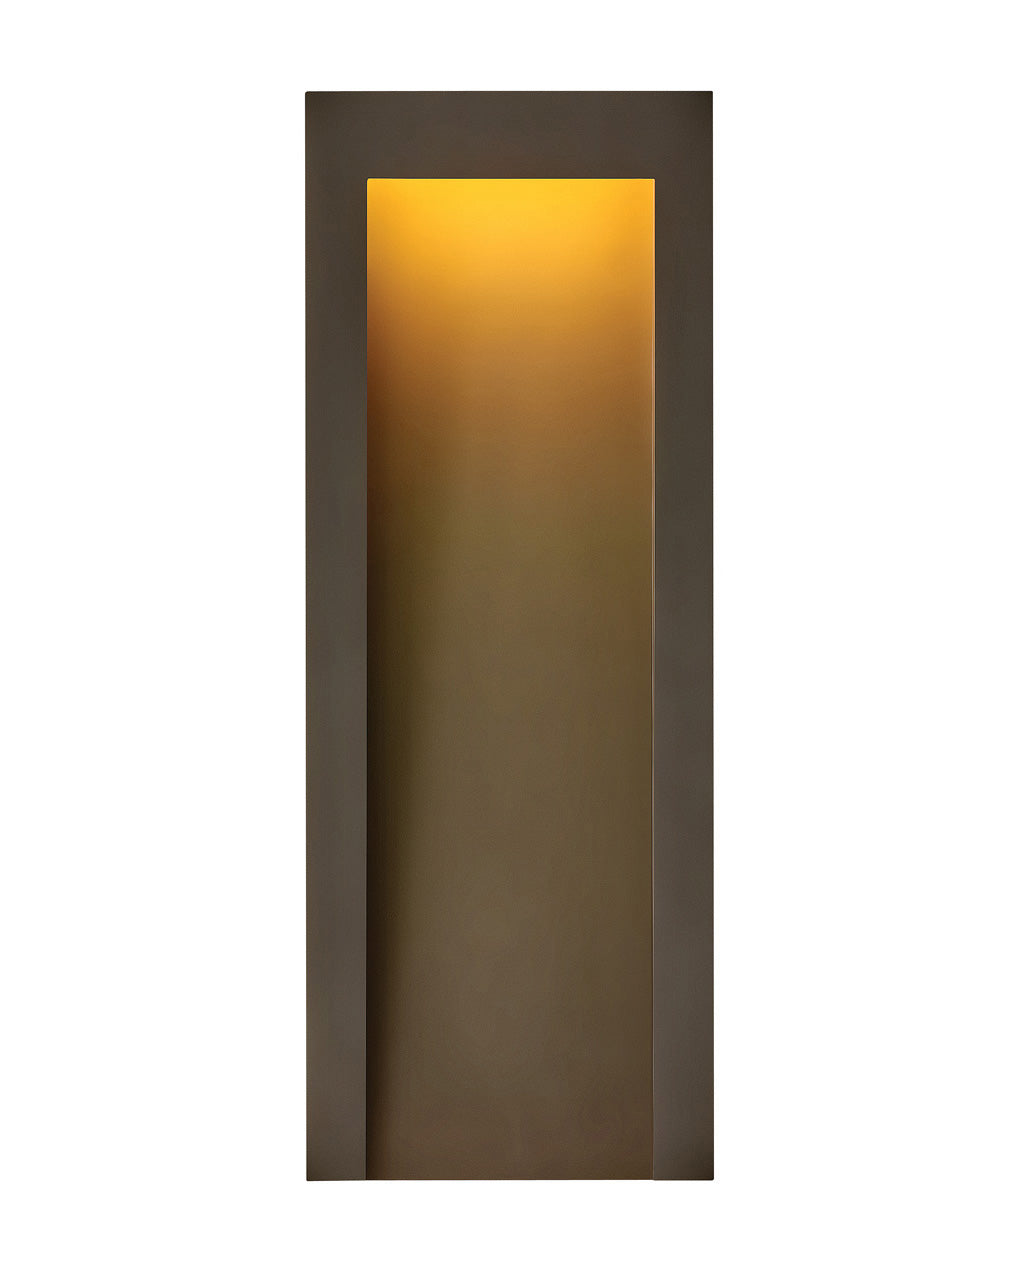 OUTDOOR TAPER Wall Mount Lantern Outdoor l Wall Hinkley Textured Oil Rubbed Bronze 4.0x9.0x24.0 